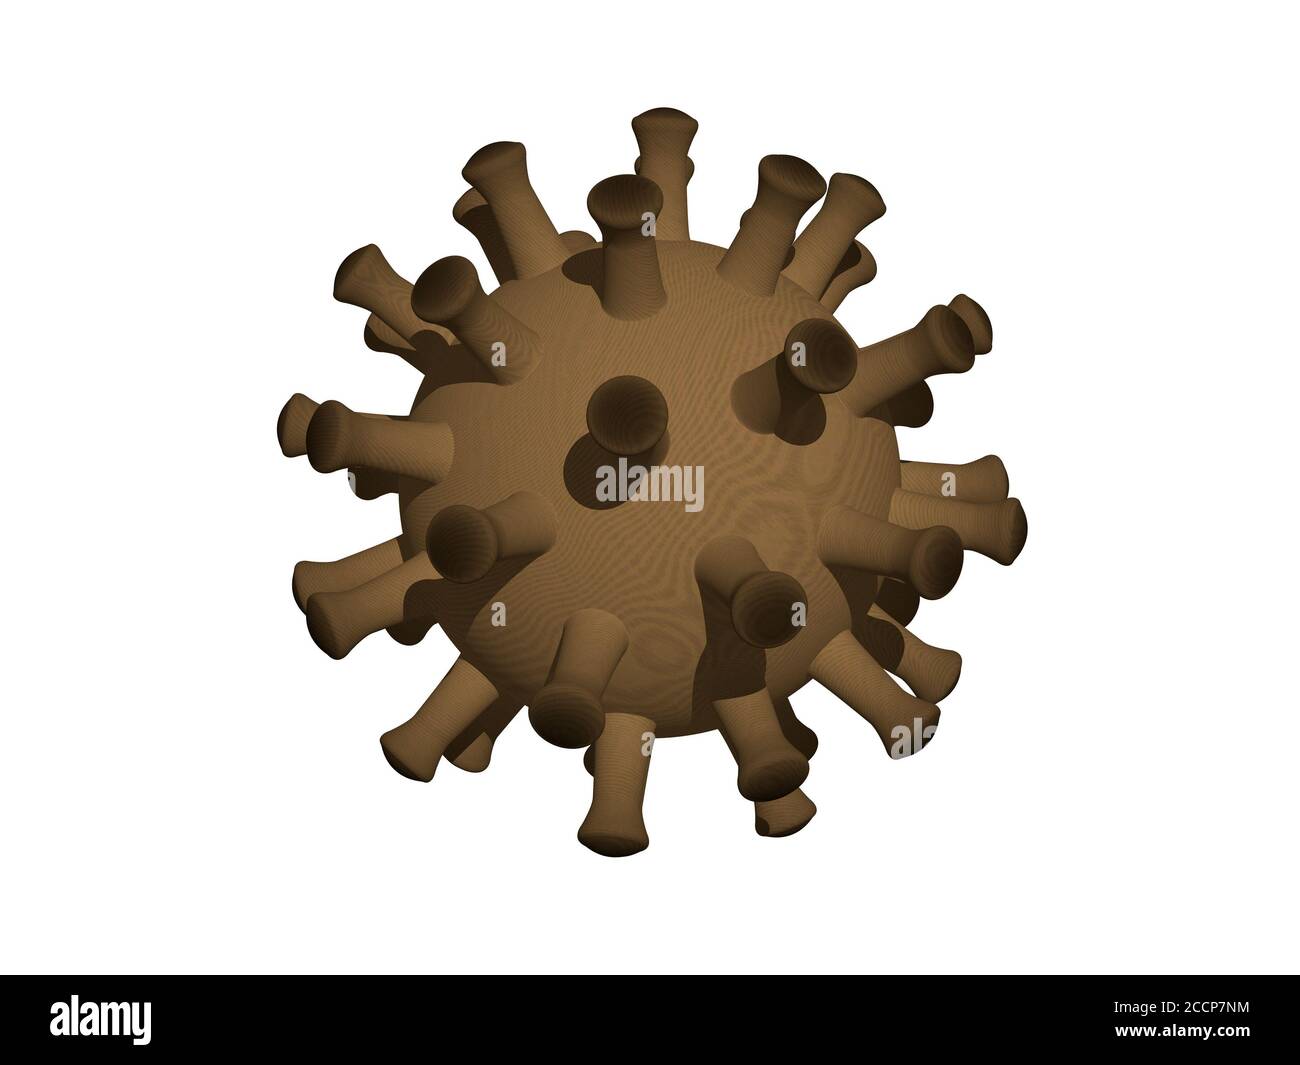 WOOD CORONA virus illustration having sticky arms around the body with a uniform texture by 3D rendering, 3D illustration Stock Photo